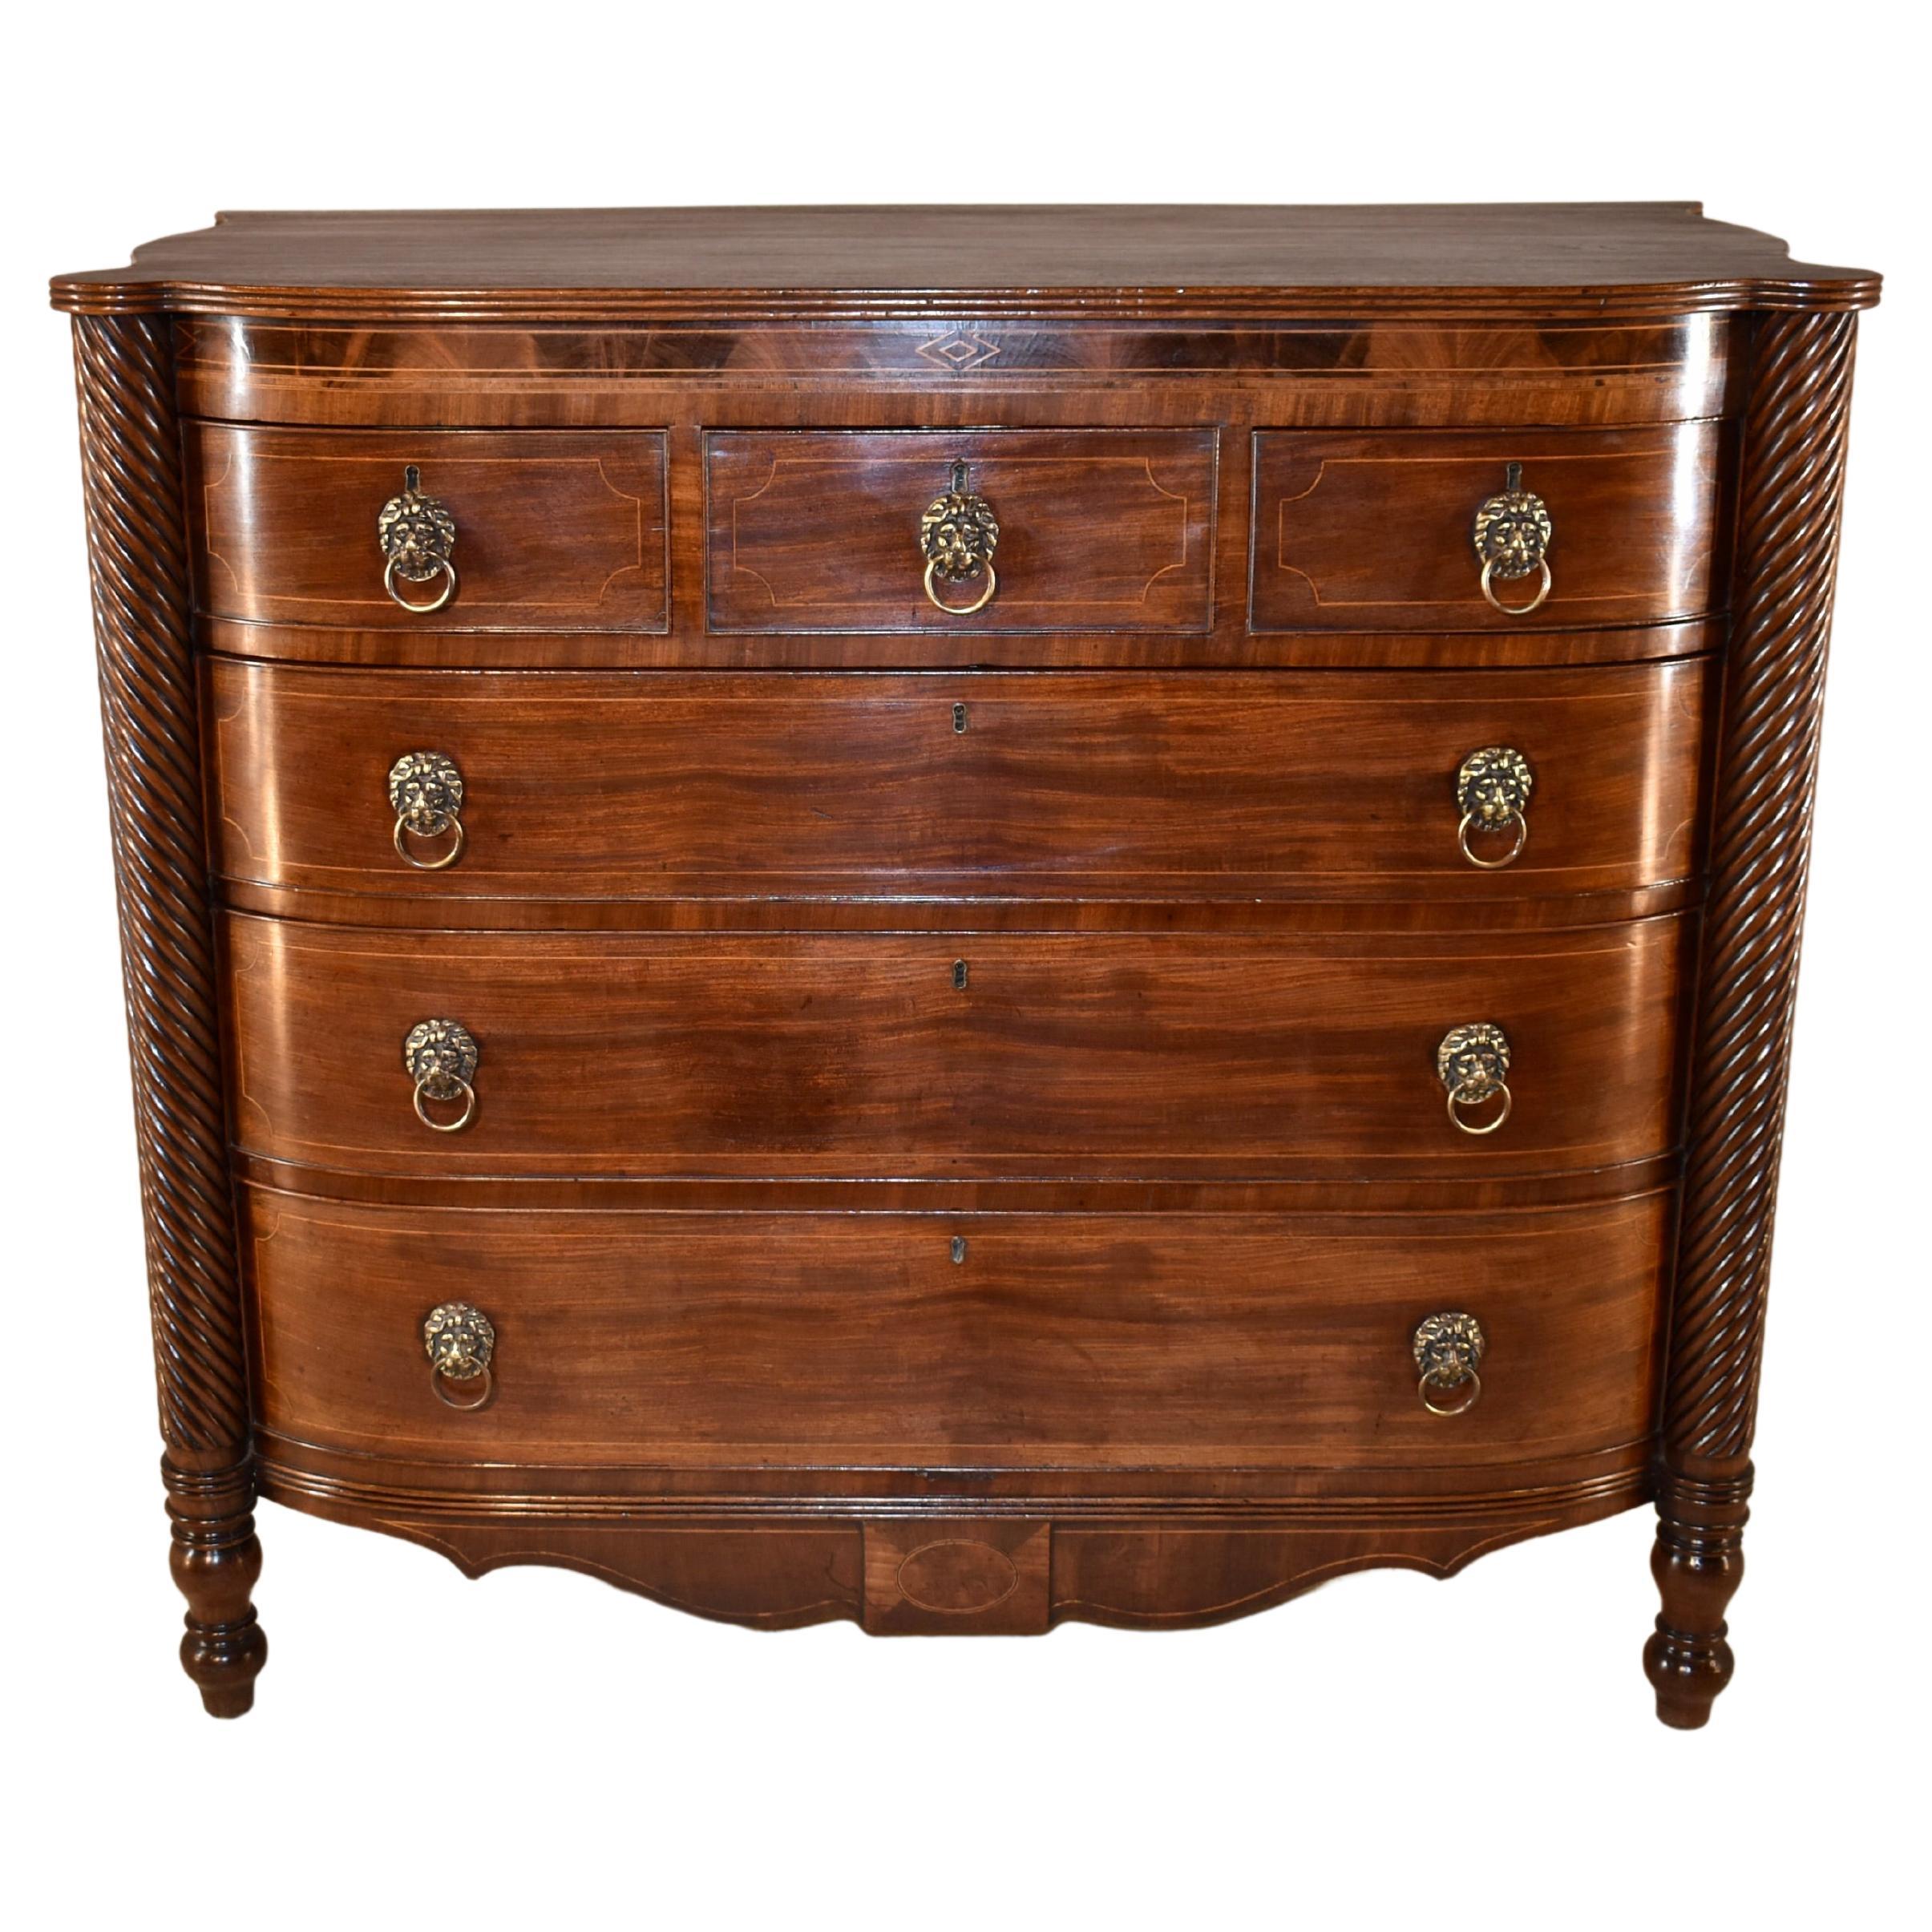 Early 19th Century English Bow Front Chest of Drawers